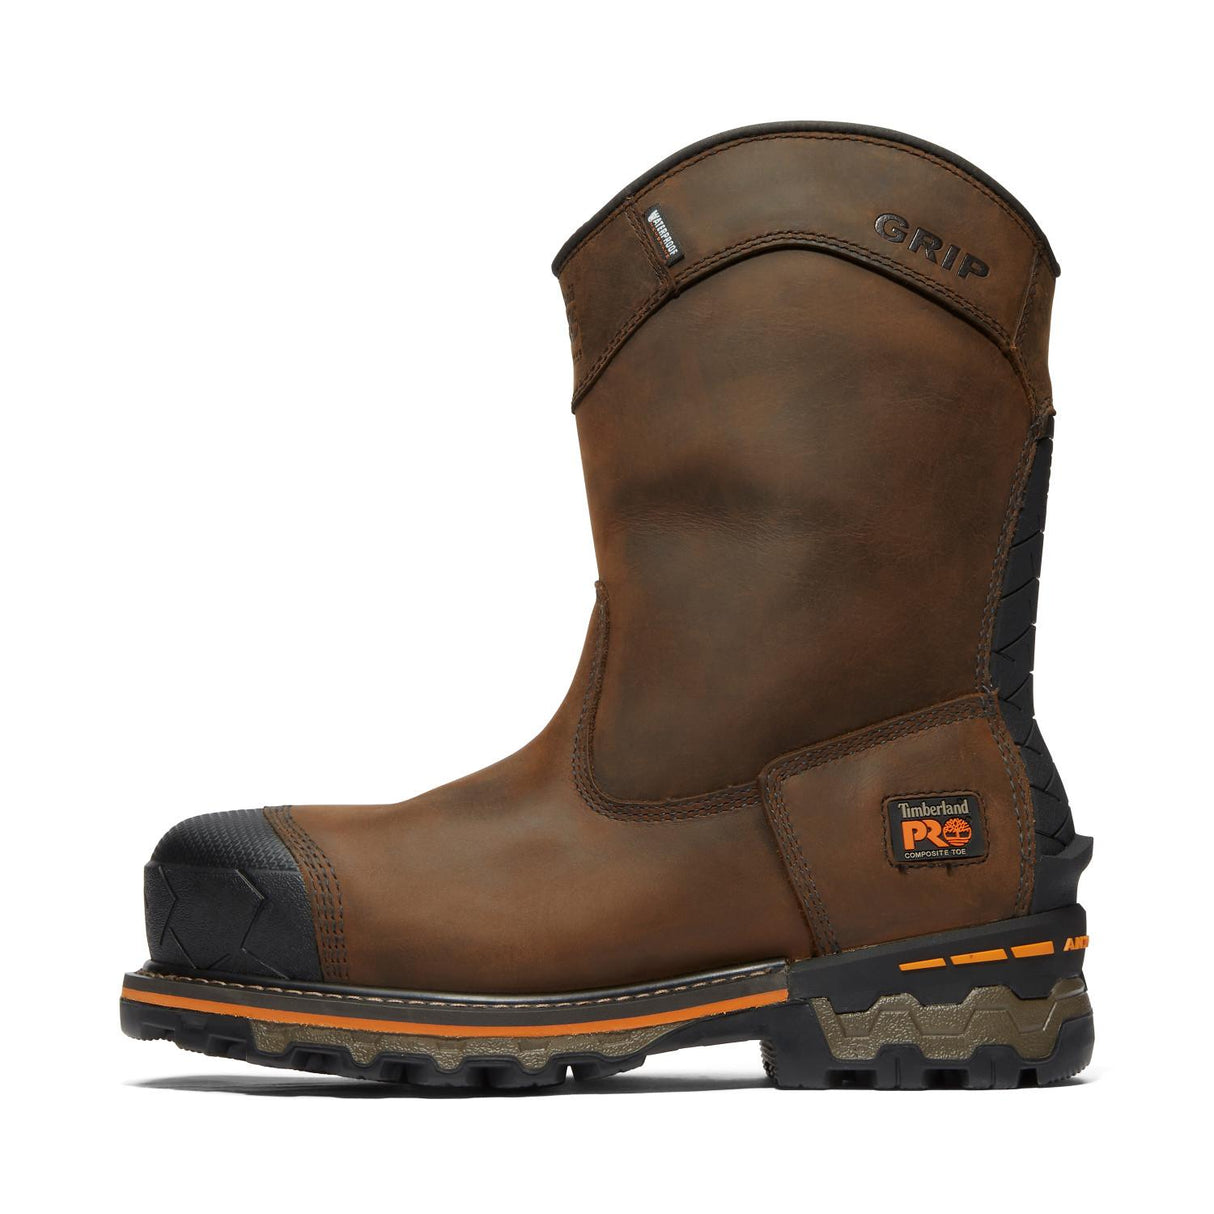 Timberland Pro-Boondock Pullon Composite-Toe Waterproof Fp Ins Csa 200G Brown-Steel Toes-8